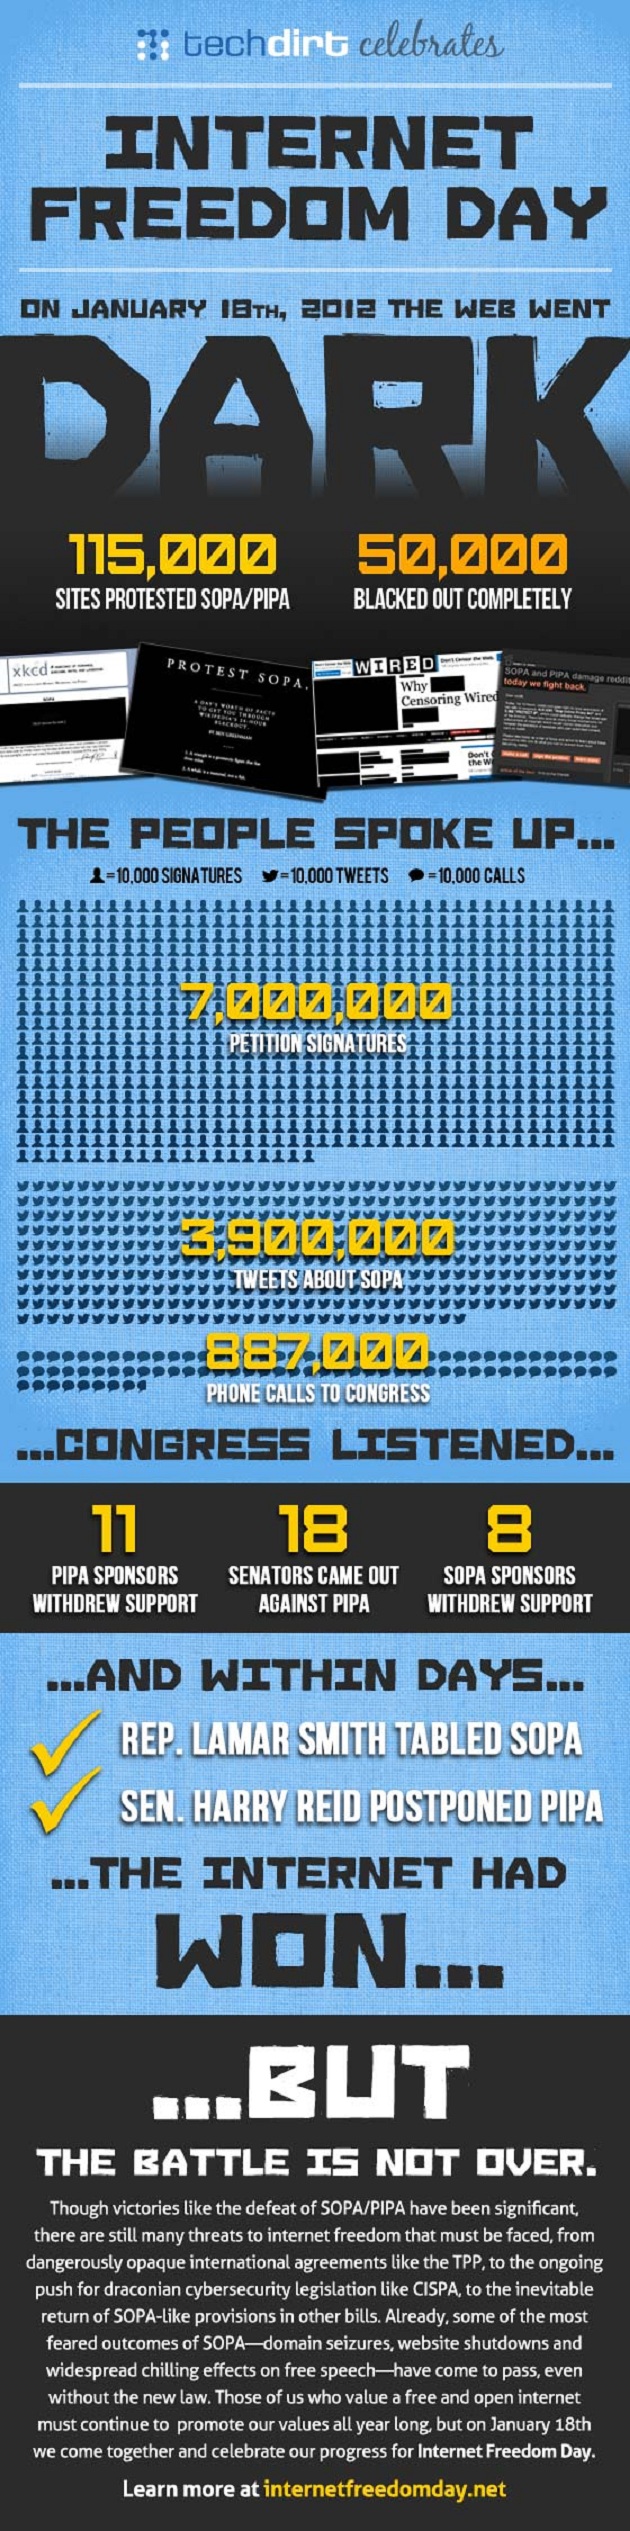 372006-infographic-internet-freedom-day